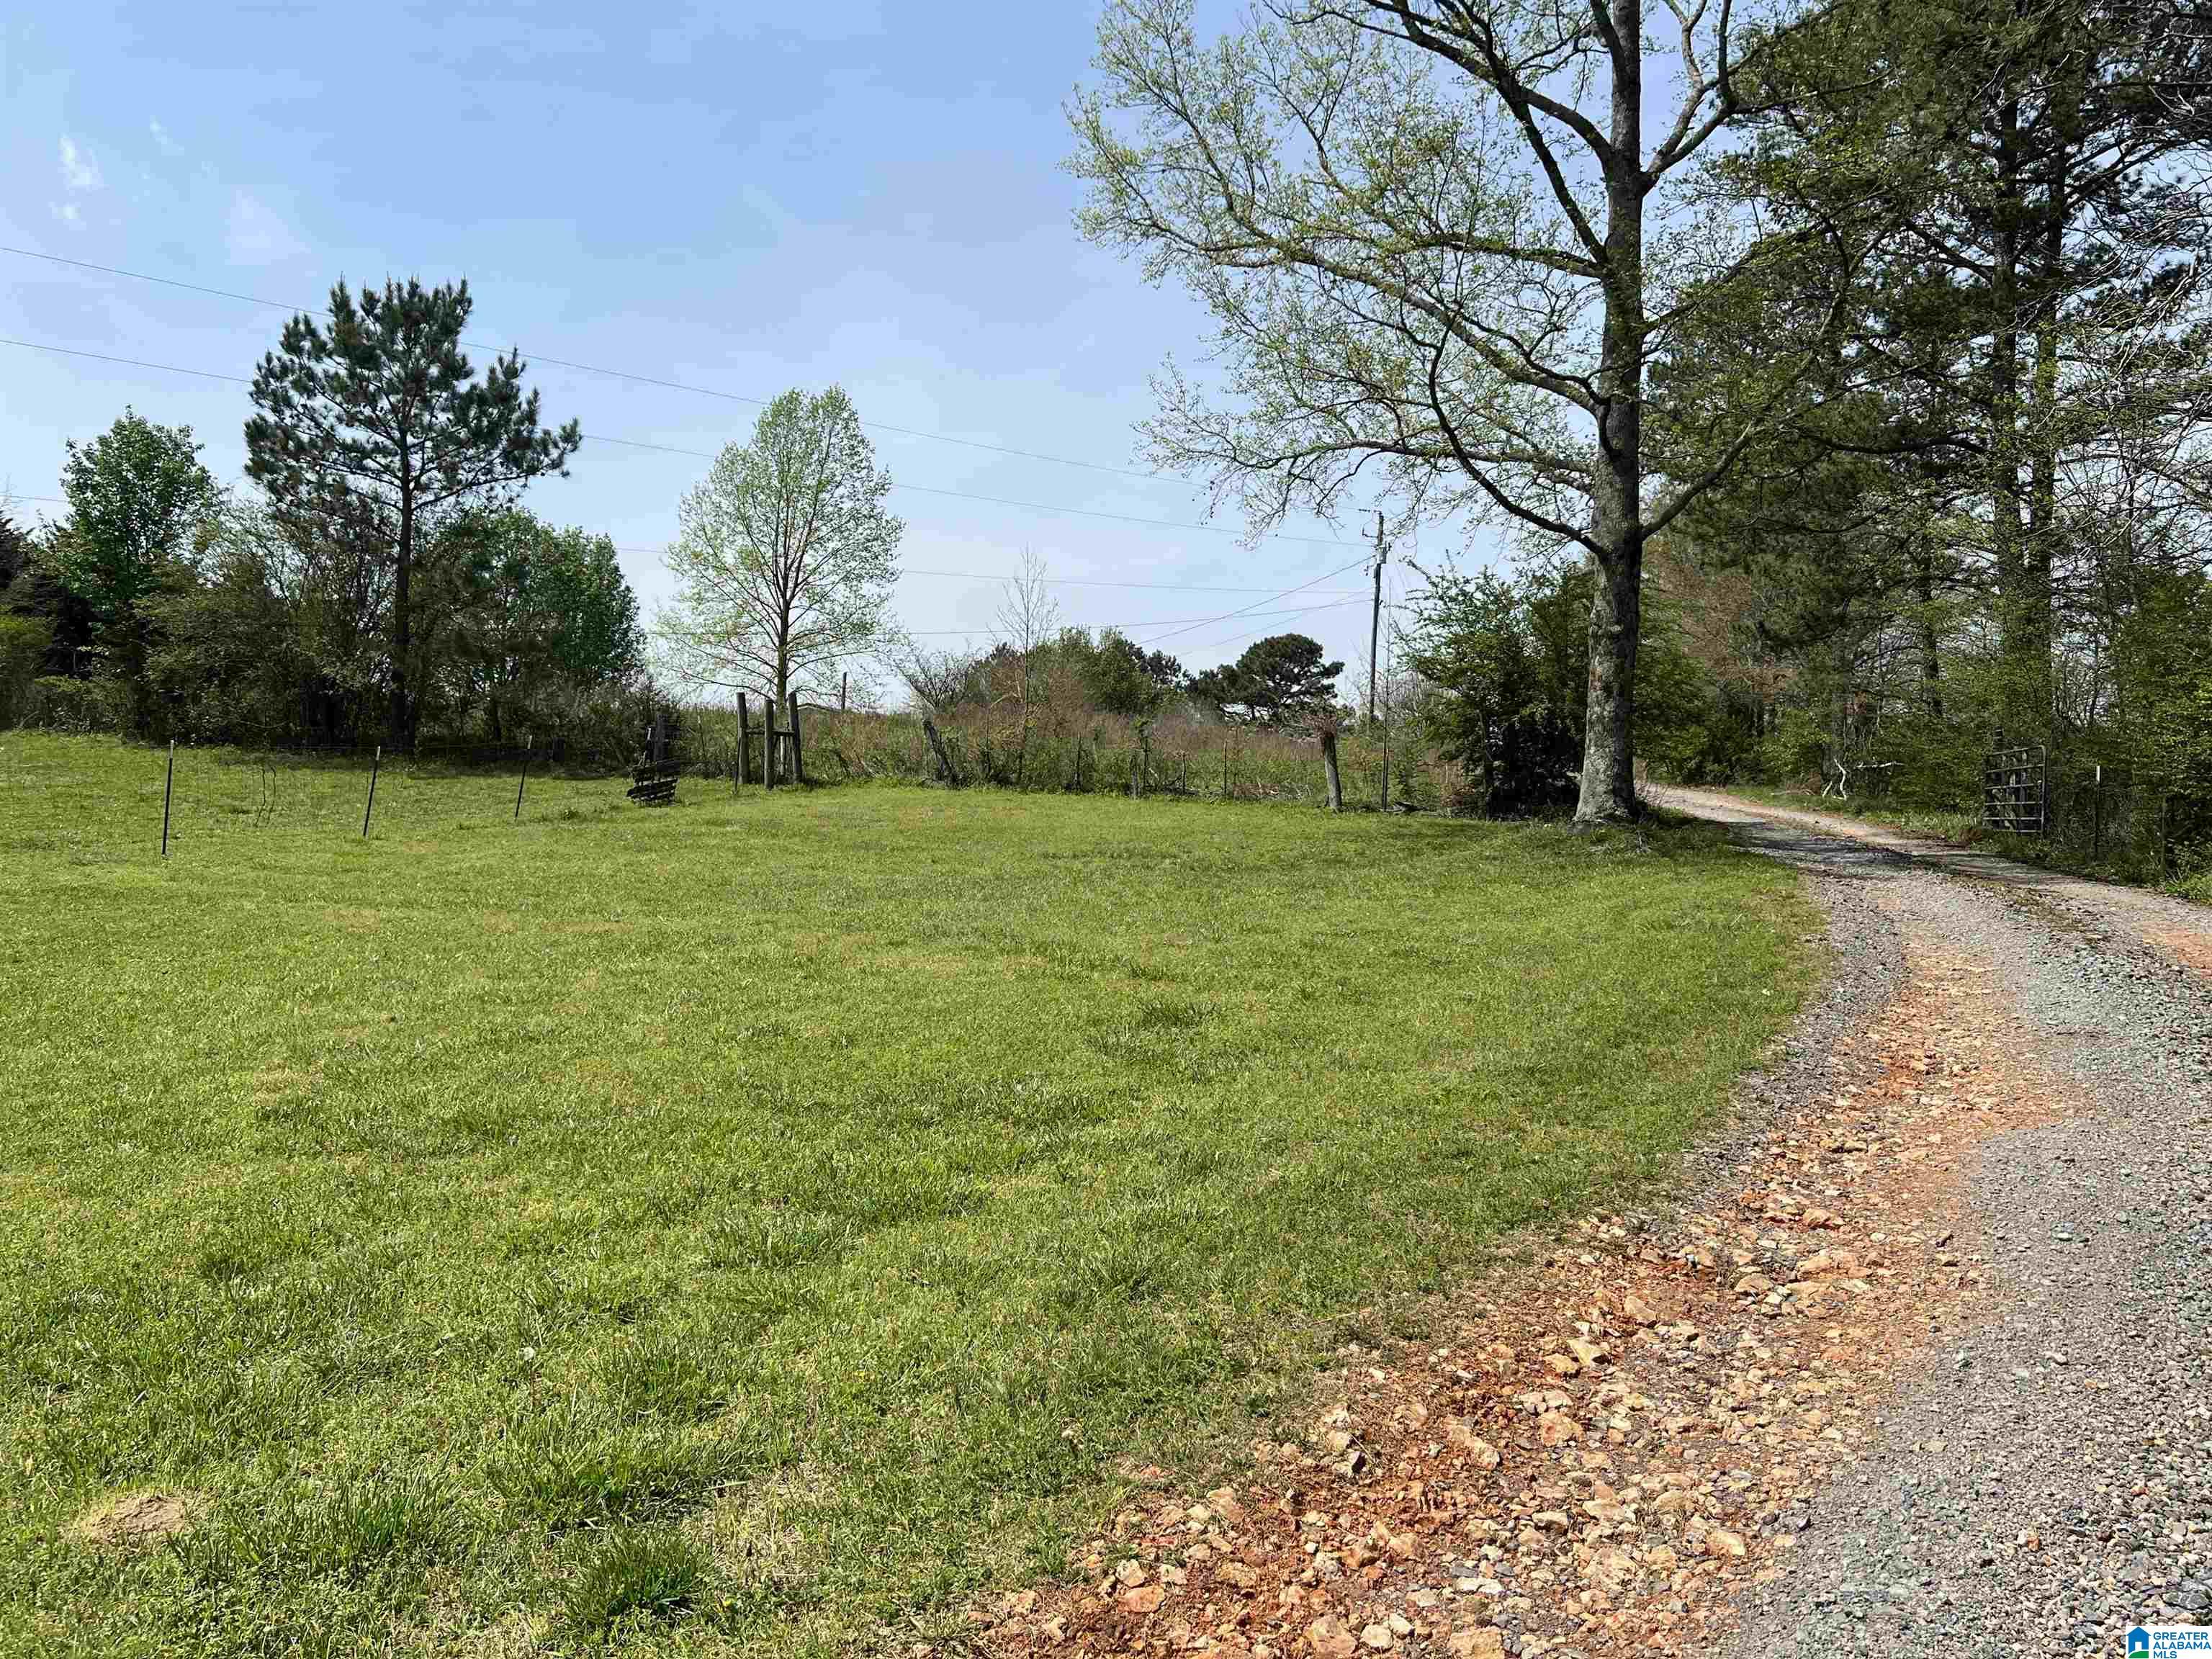 This property is gated and partially fenced giving you nice privacy and as you can see some of this land is open and well maintained.  The owner spent weekends and brought horses for riding and then having a place to allow them to graze within the fences